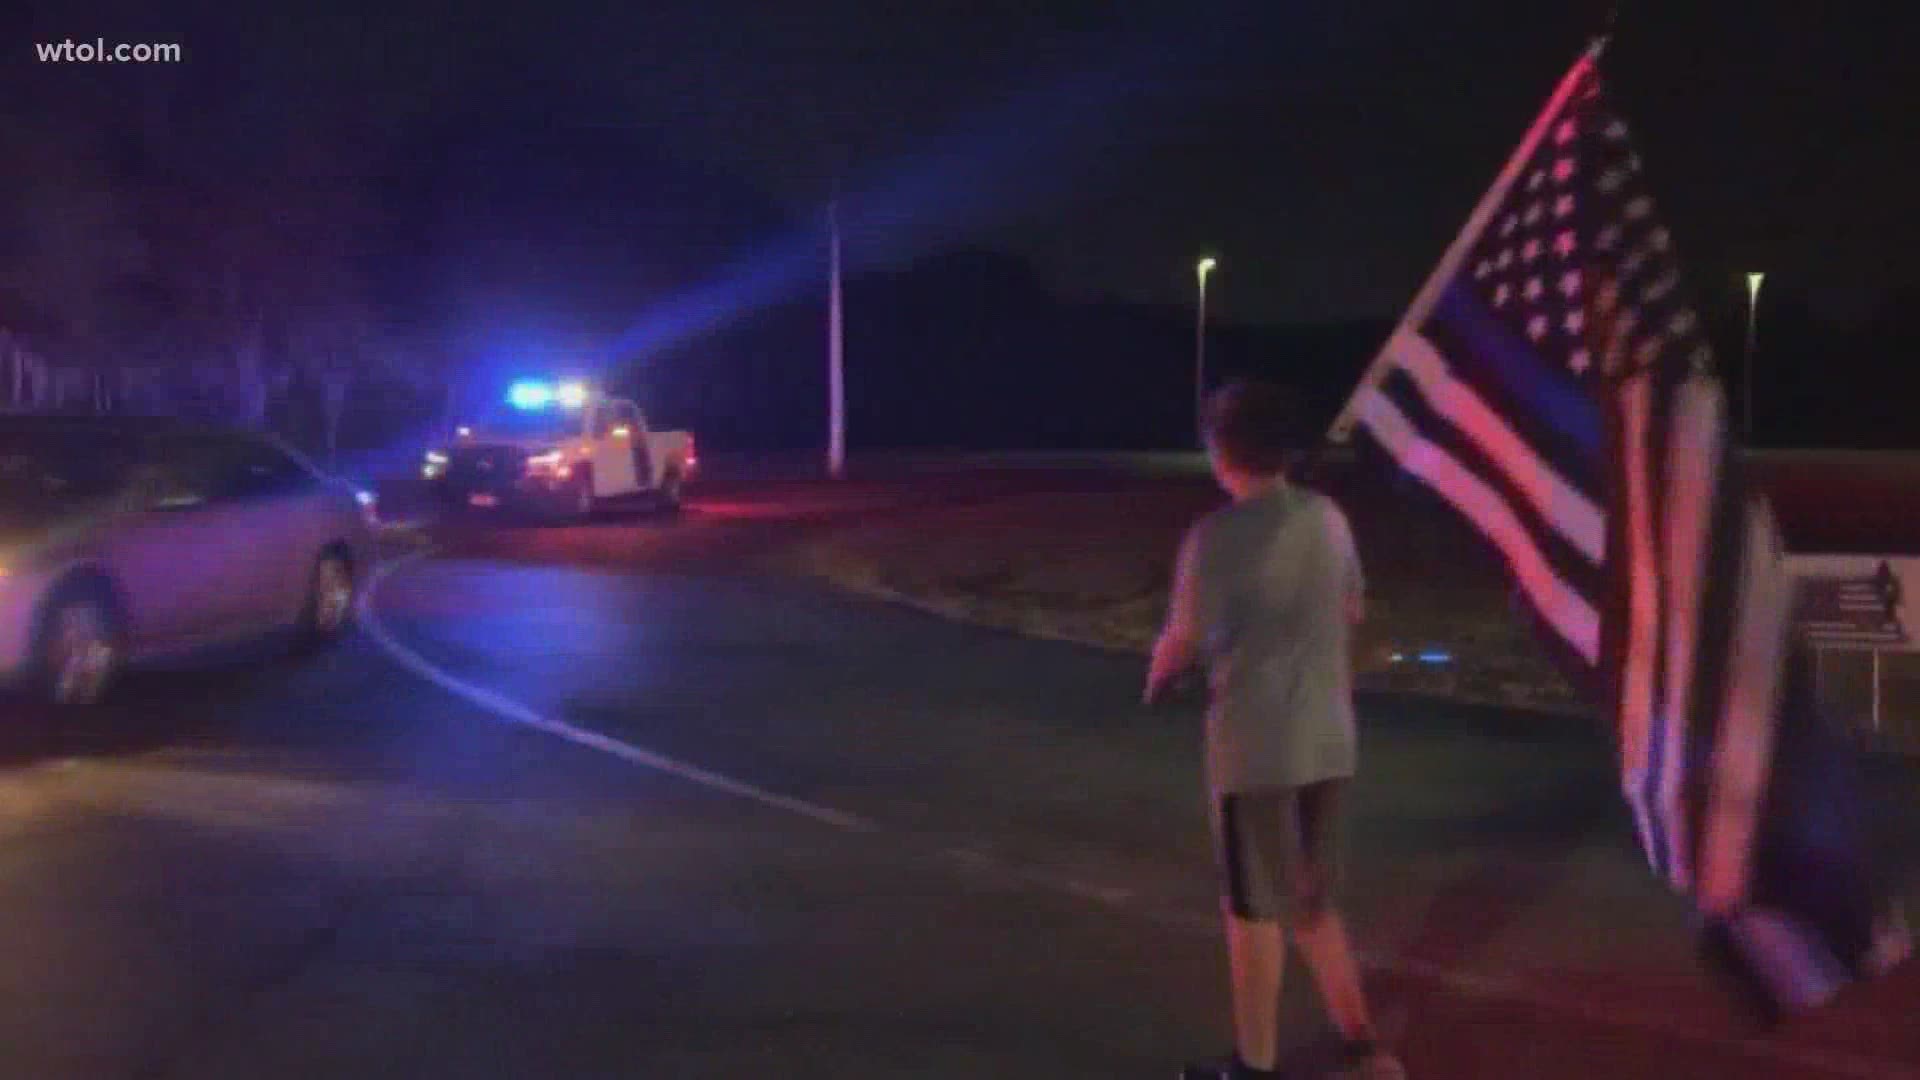 Zechariah Cartledge has been running for fallen first responders for just over 2 years. He's ran more than 800 miles. Mile 800 was for Ofc. Brandon Stalker.